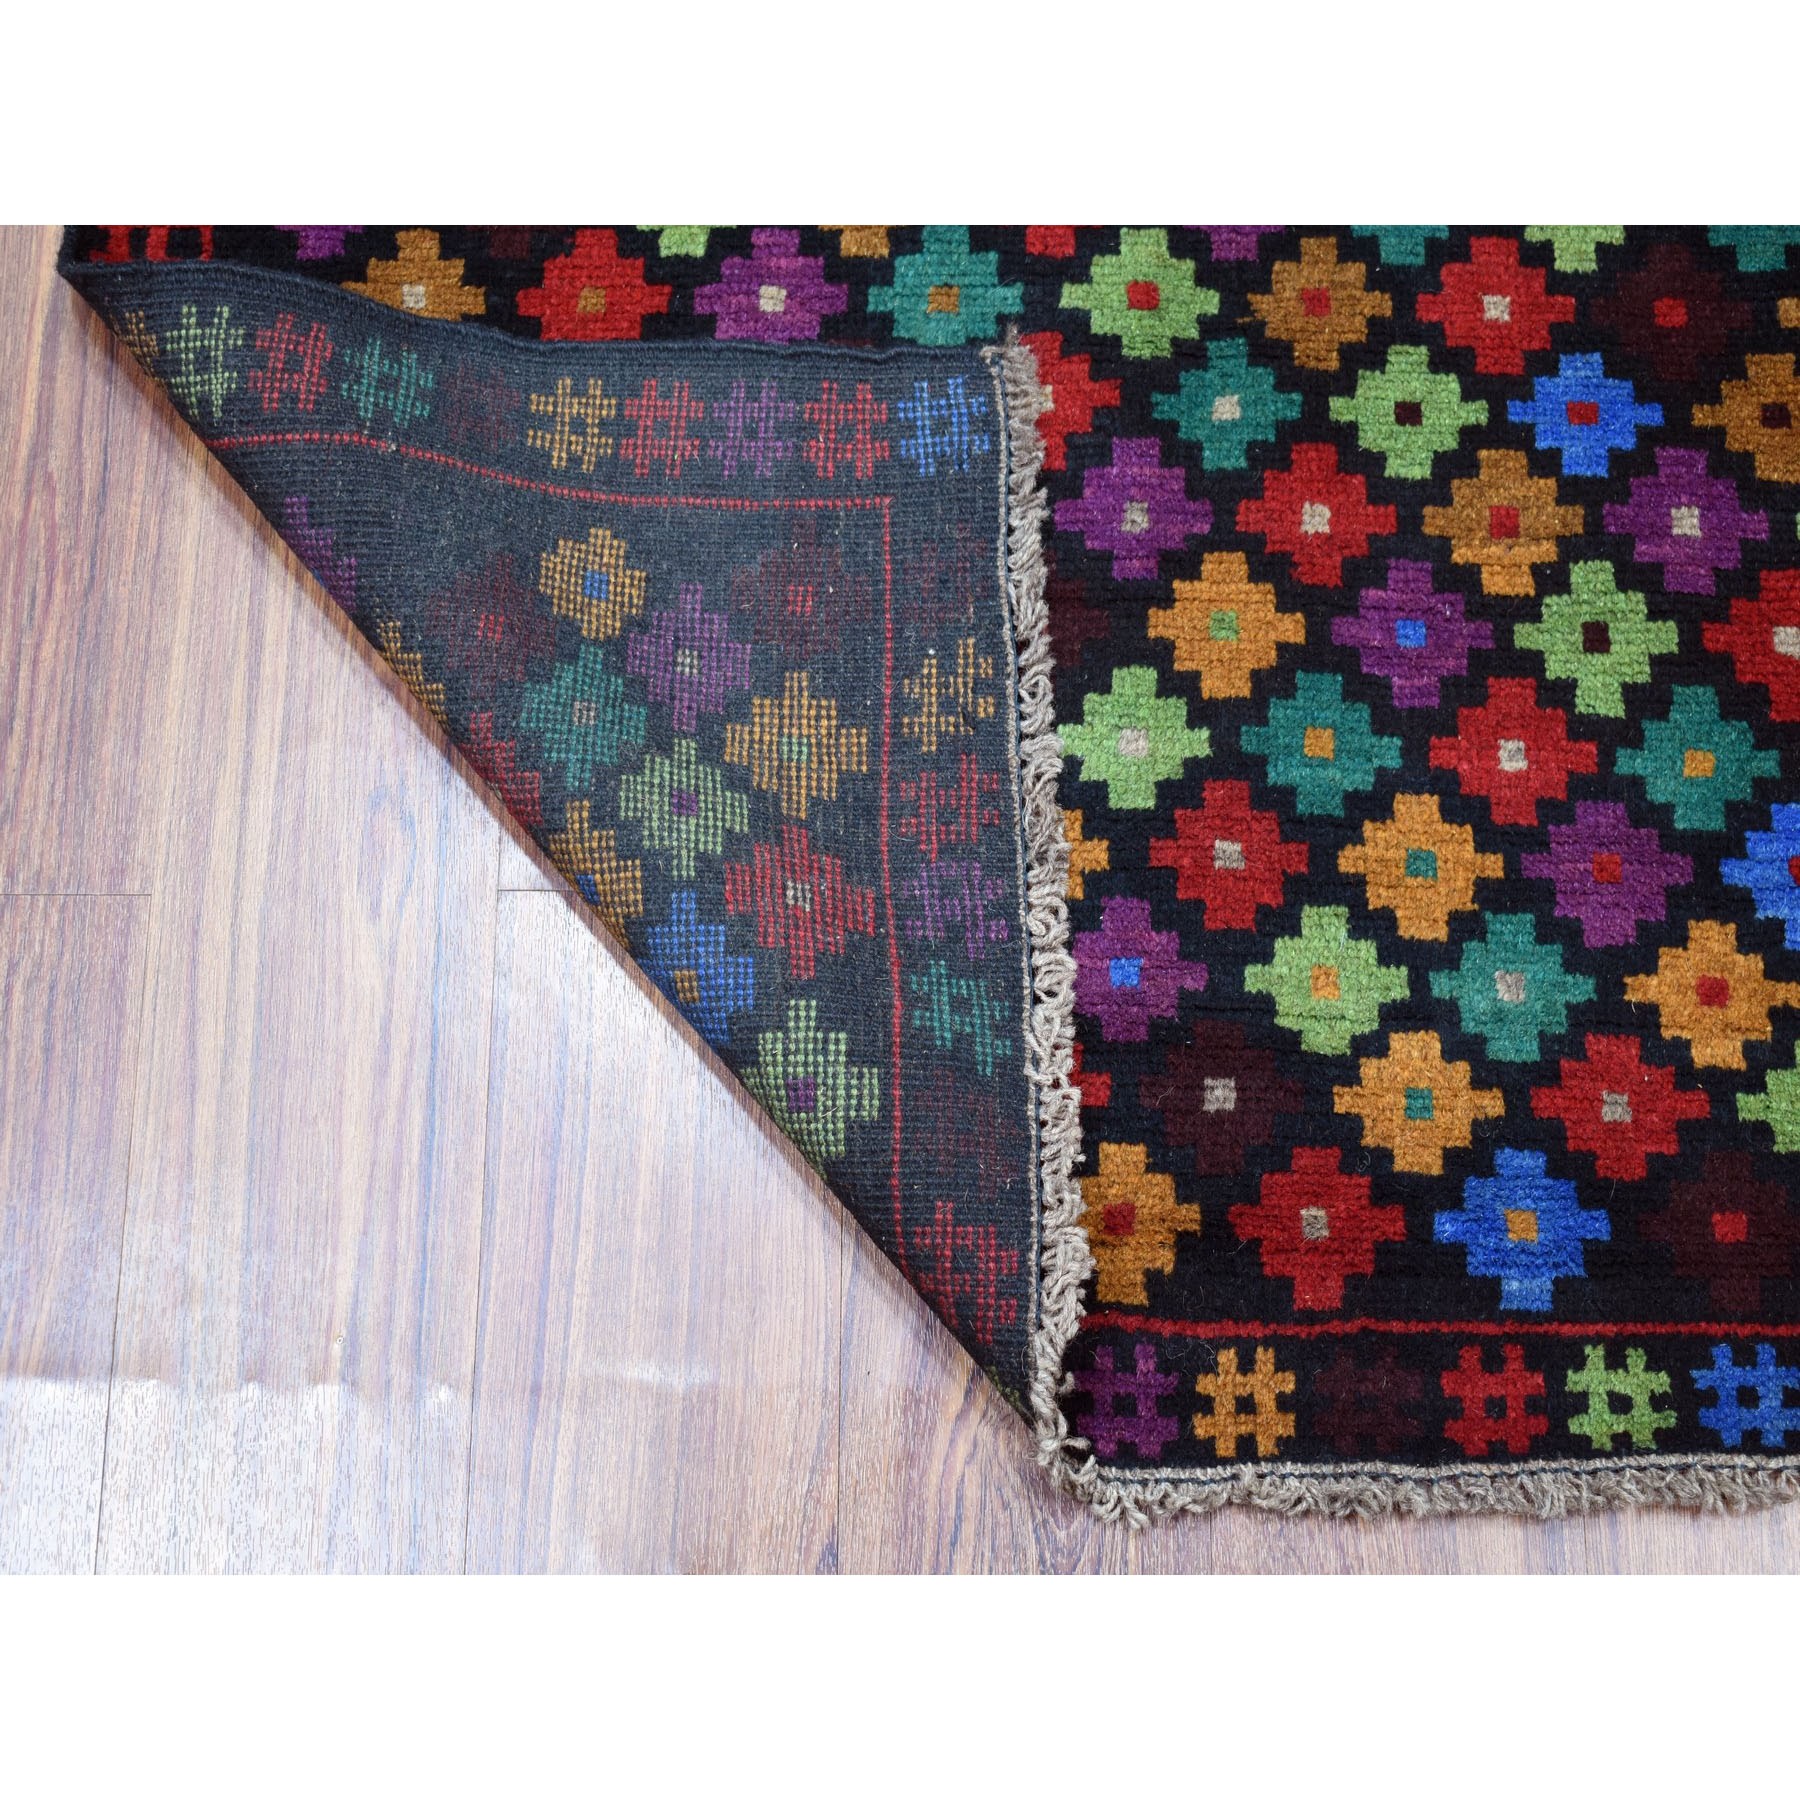 3-5 x5- Colorful Afghan Baluch All Over Design Hand Knotted Pure Wool Oriental Rug 